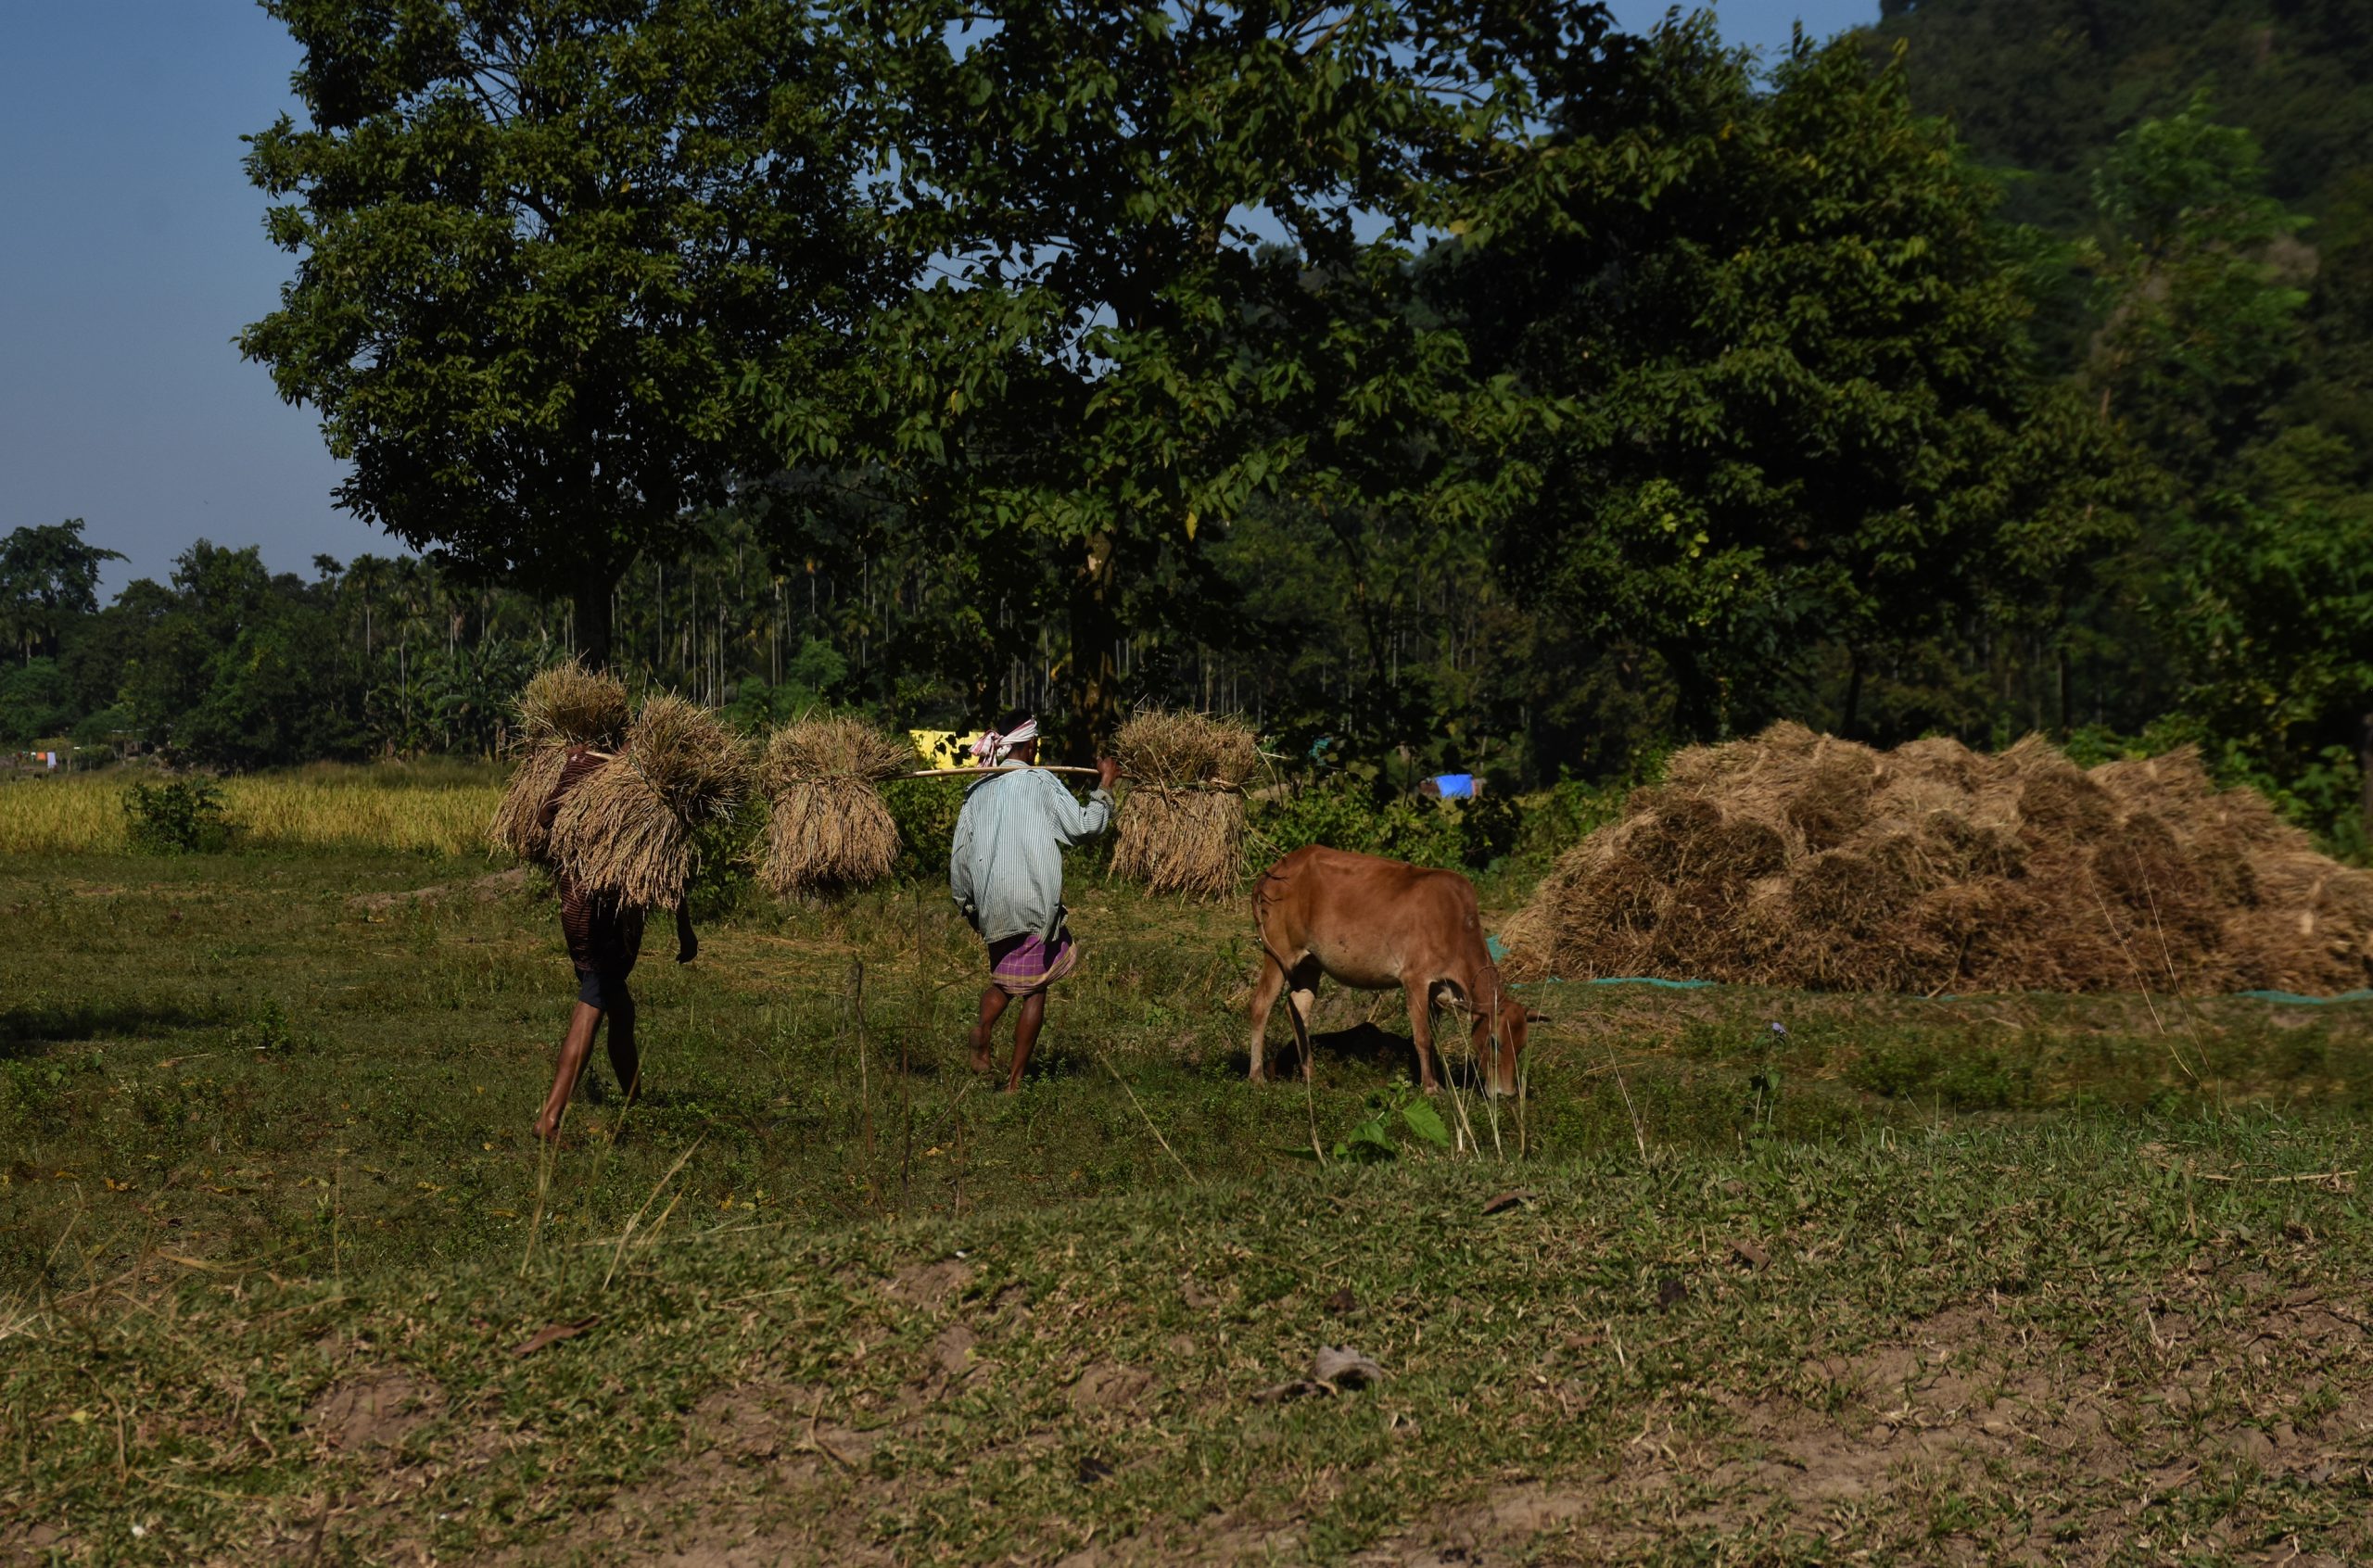 Farmer and their cattle in field